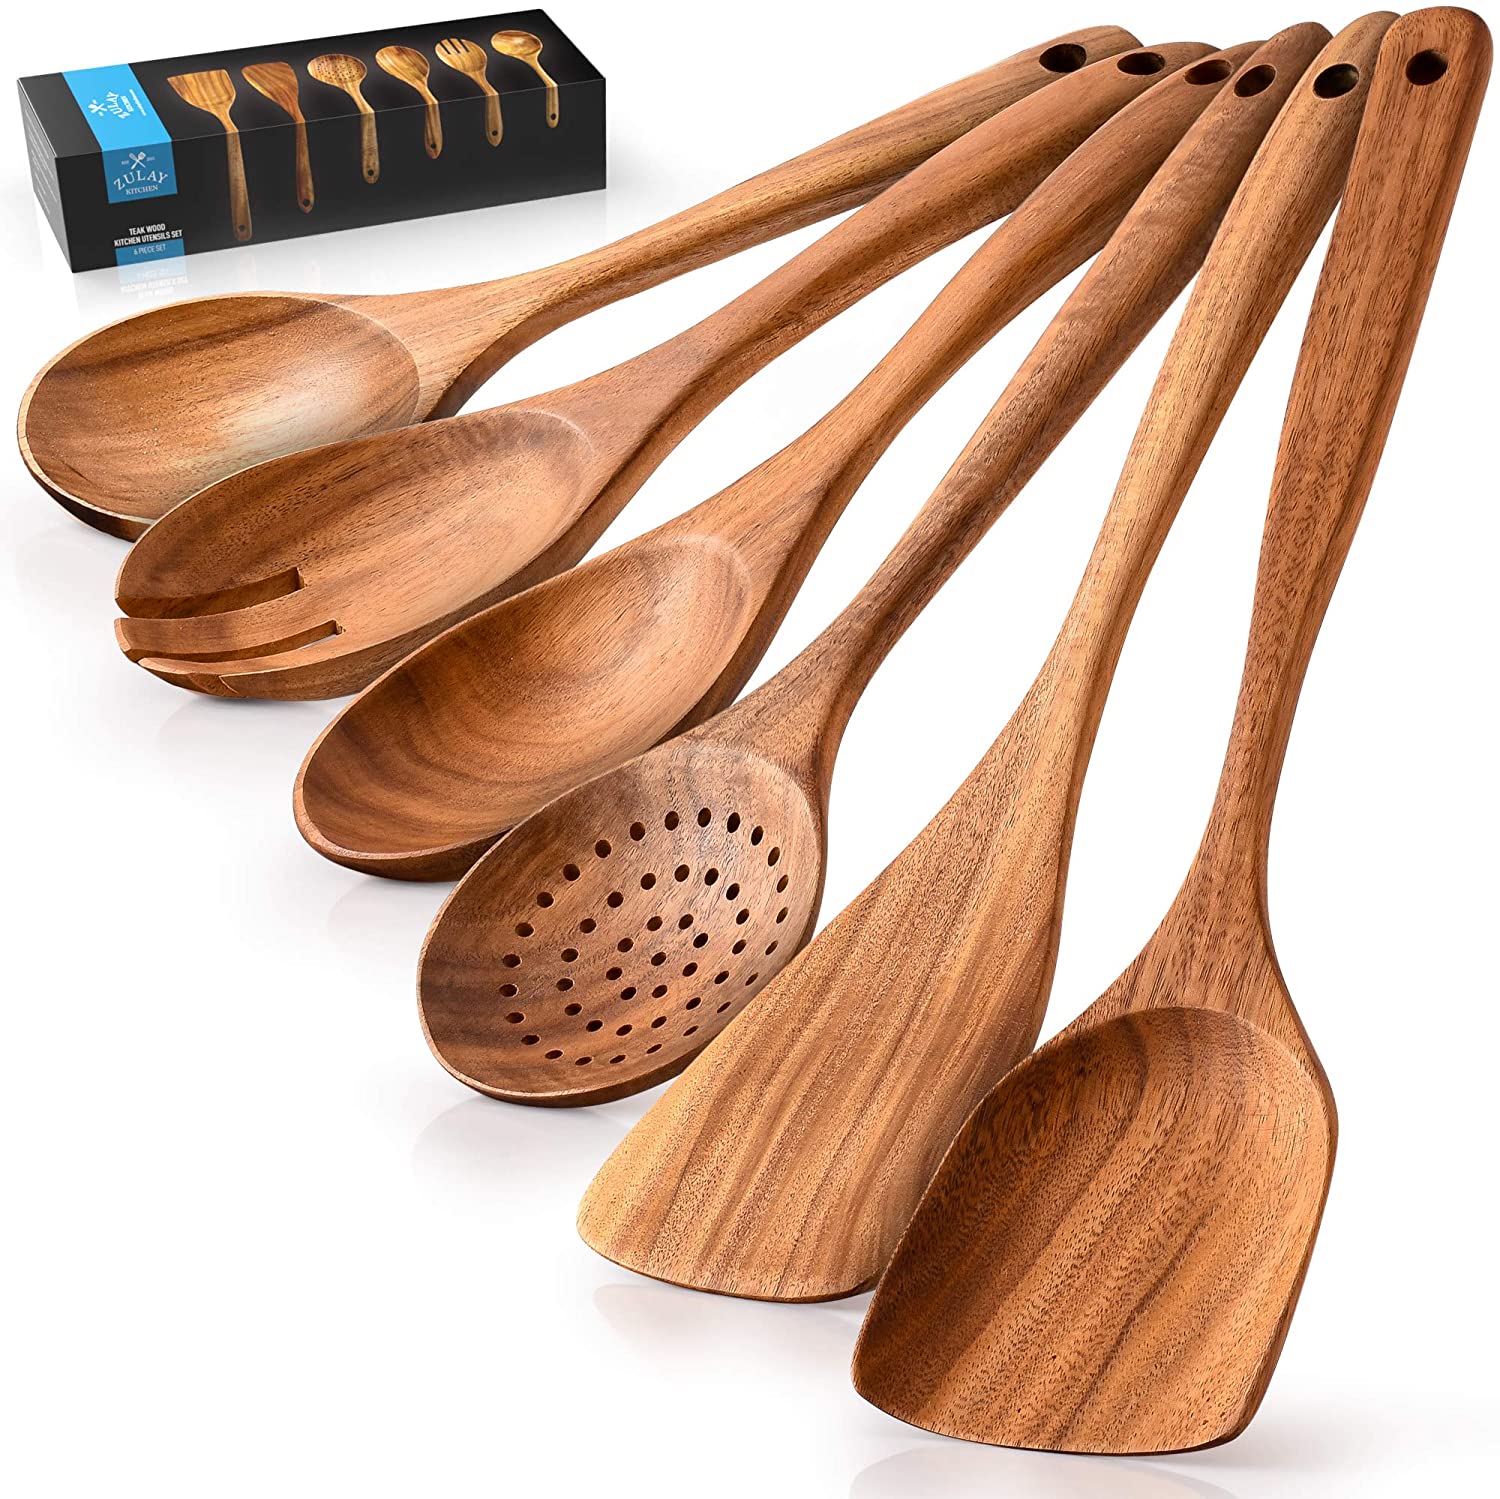 Zulay Kitchen Wooden Spoon Set For Cooking